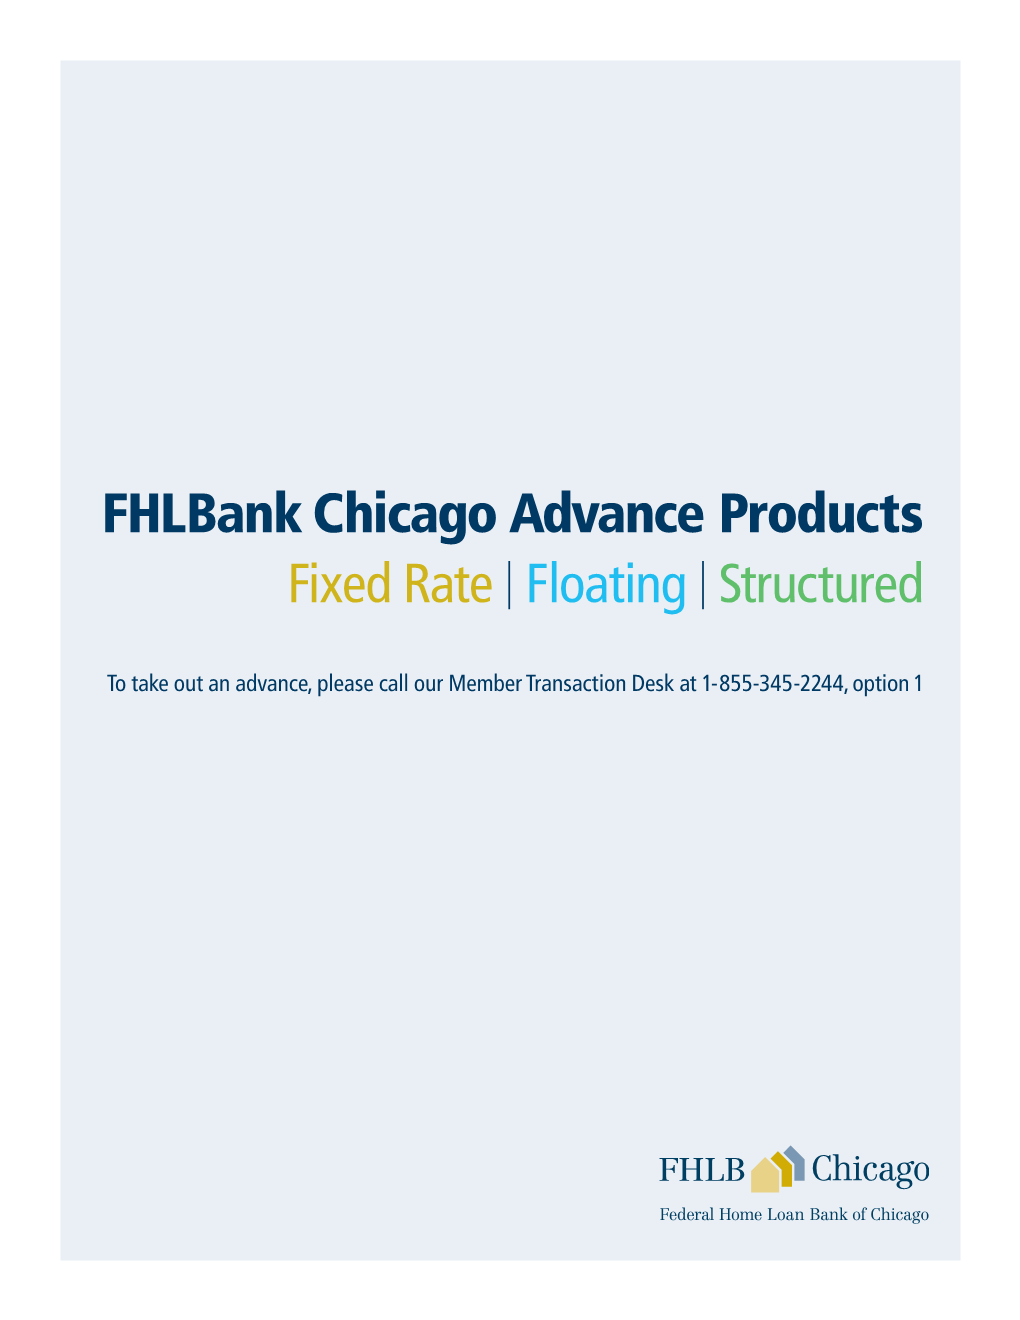 Fhlbank Chicago Advance Products Fixed Rate | Floating | Structured